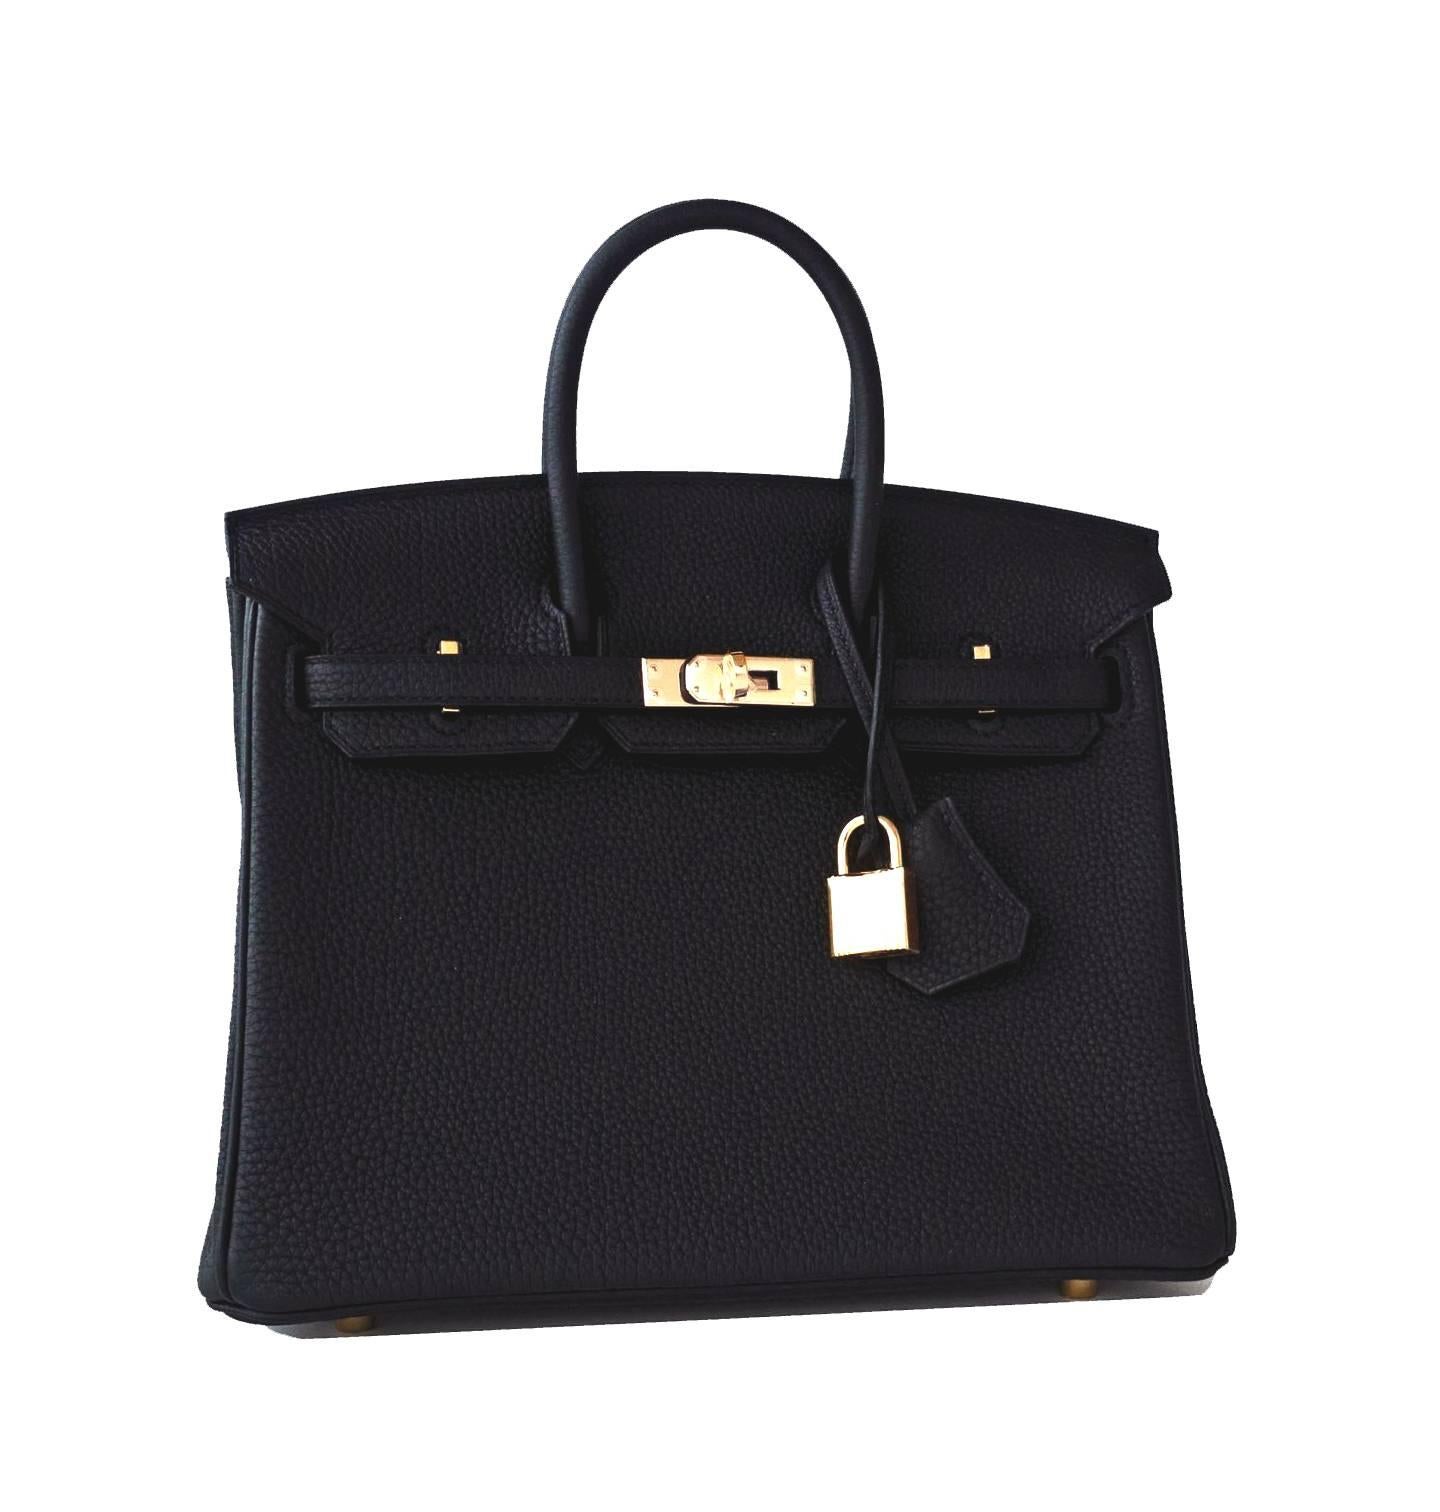 Hermes Black Baby Birkin 25cm Togo Gold GHW Satchel Jewel
Brand New in Box. Store Fresh. Pristine Condition (with plastic on hardware)
Just purchased from Hermes store; bag bears new 2016 interior X stamp.
Perfect gift! Comes full set with keys,